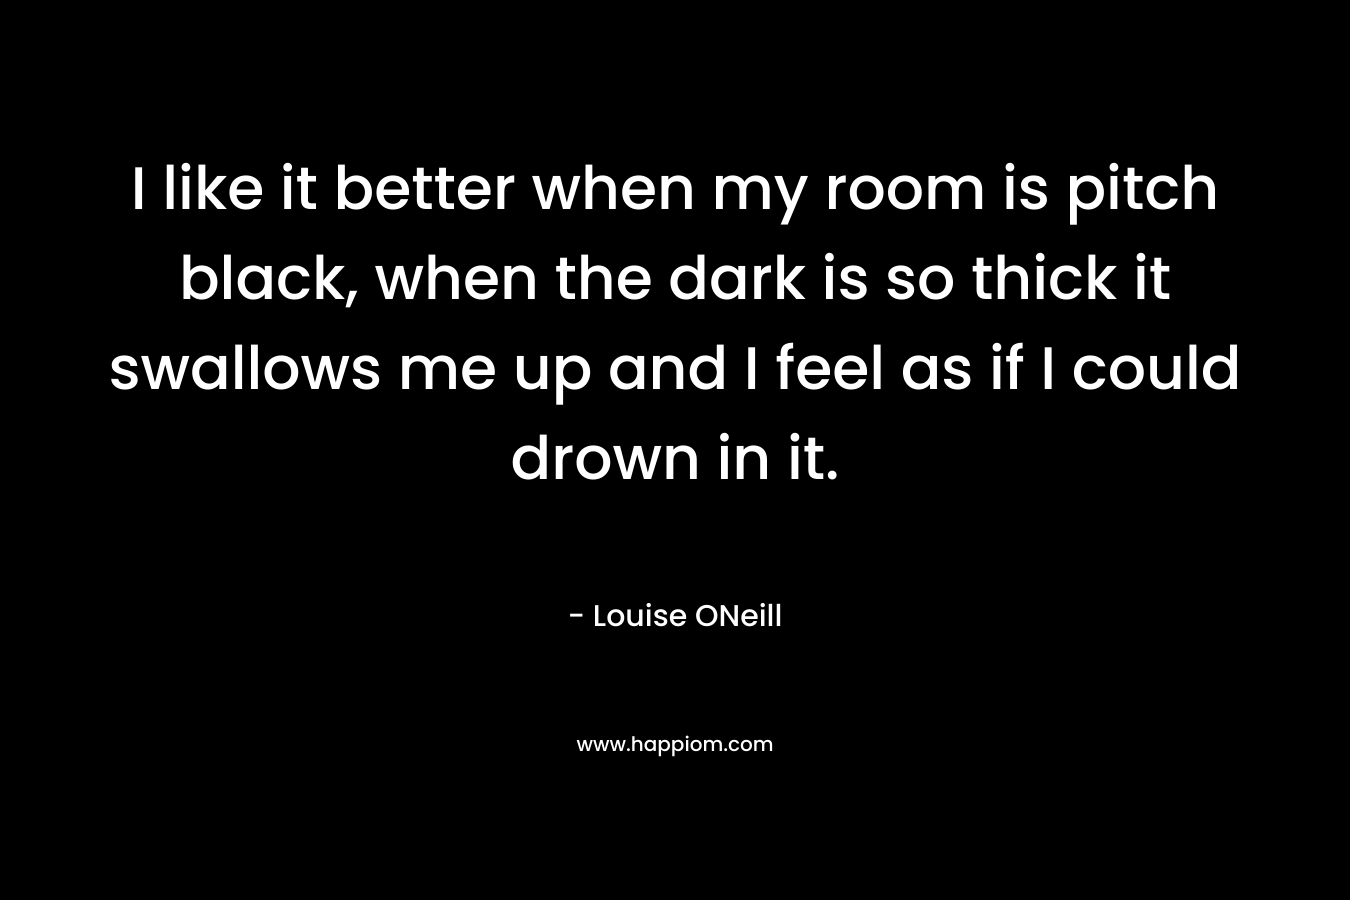 I like it better when my room is pitch black, when the dark is so thick it swallows me up and I feel as if I could drown in it. – Louise ONeill